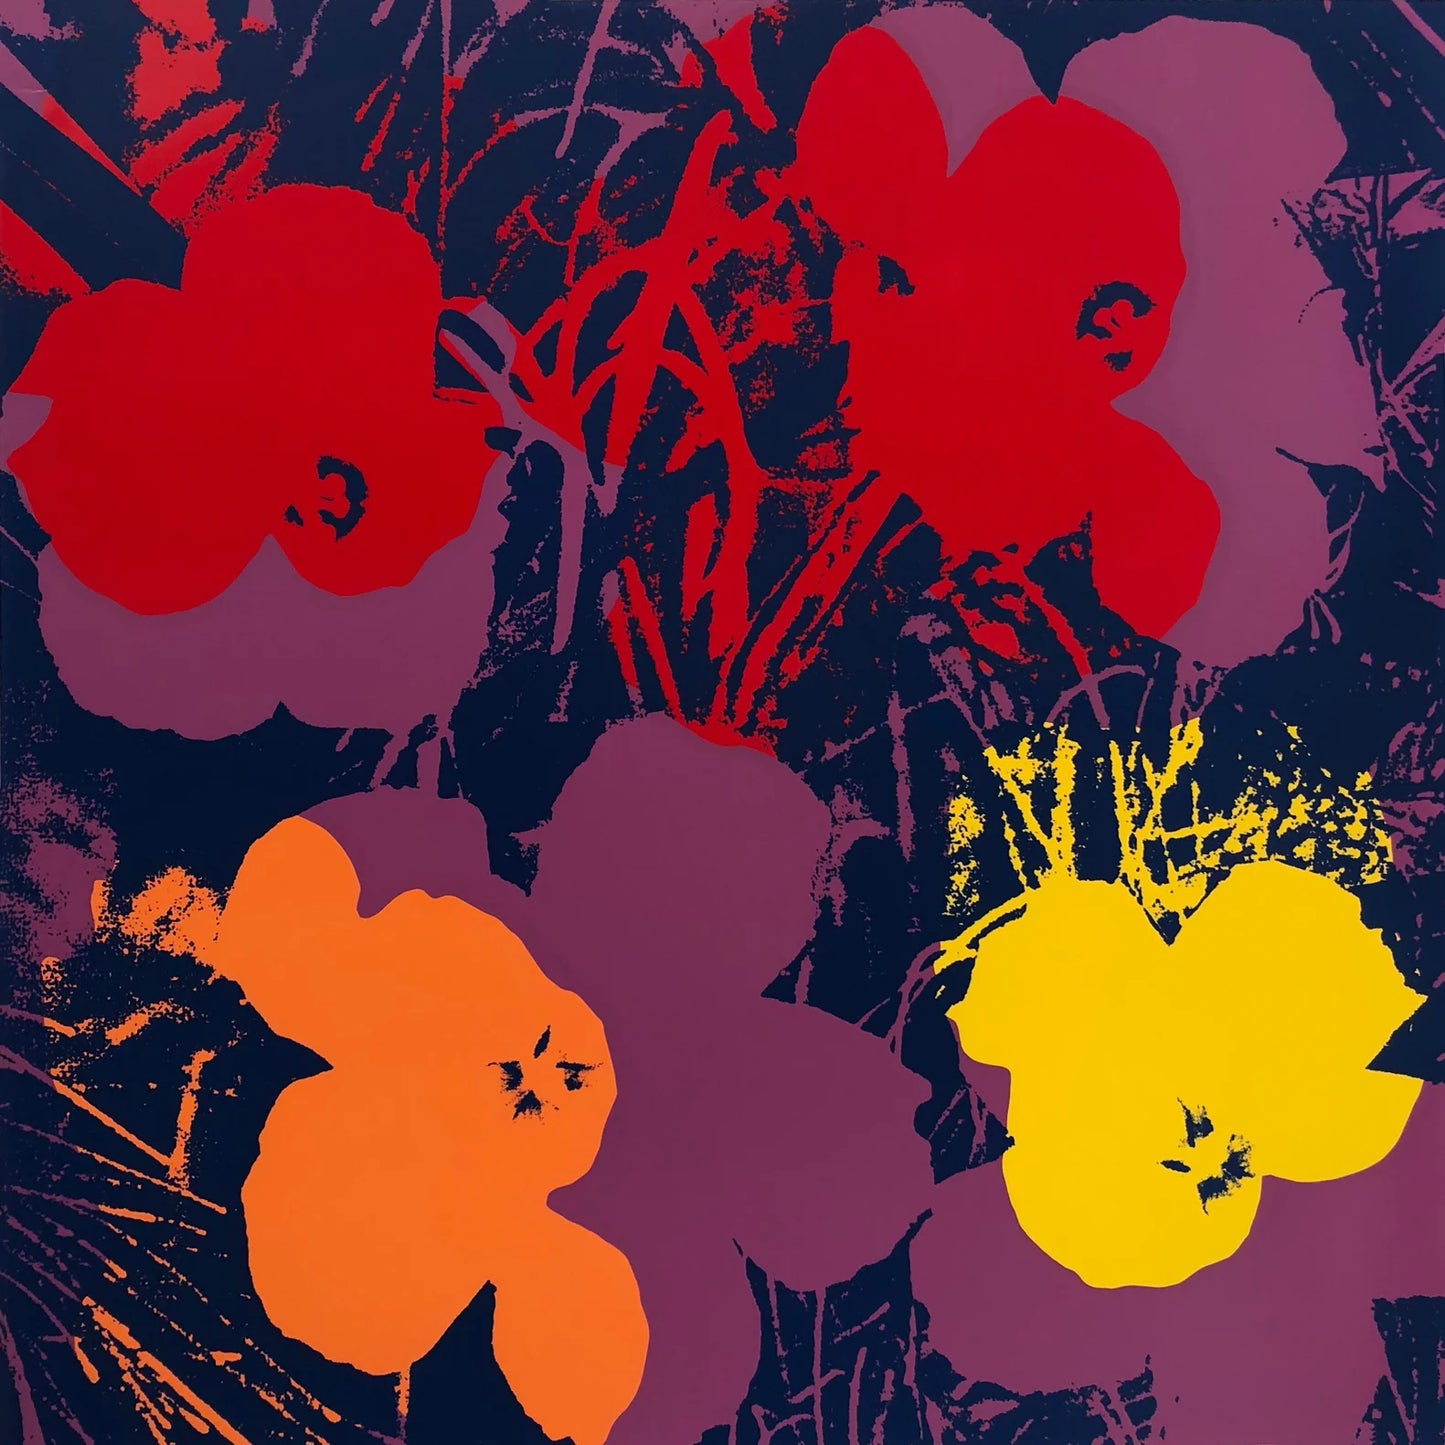 An image of an artwork by Andy Warhol titled 'Flowers 11:66' featuring Andy Warhol's iconic flowers screenprint in navy, purple, red, orange, and yellow. this is a sunday b morning print for sale.